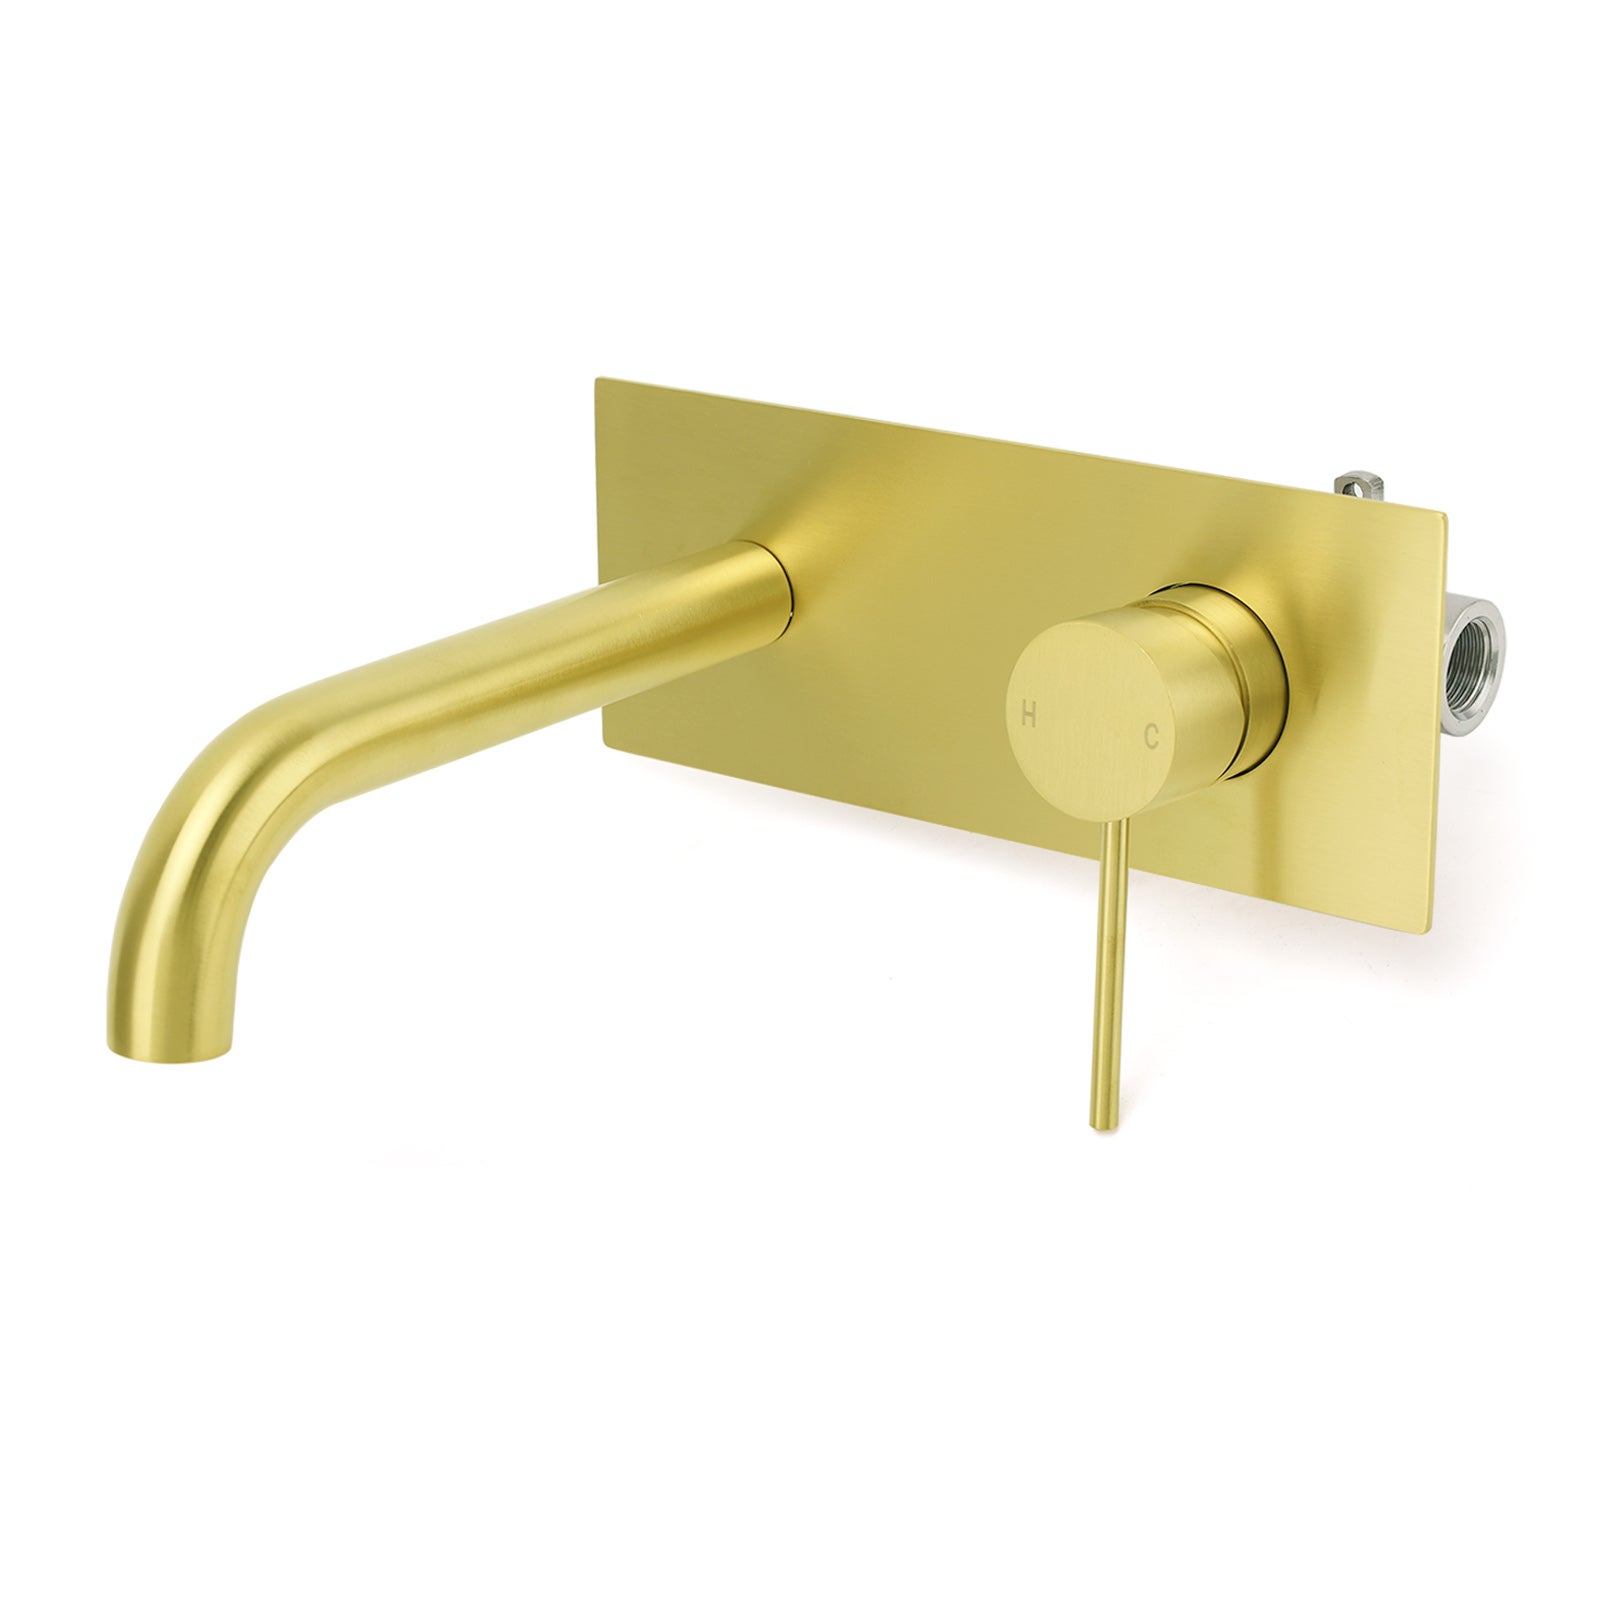 WELS Bathroom New Style Brushed Gold Wall Mount Basin Vanity Mixer Faucet Spout